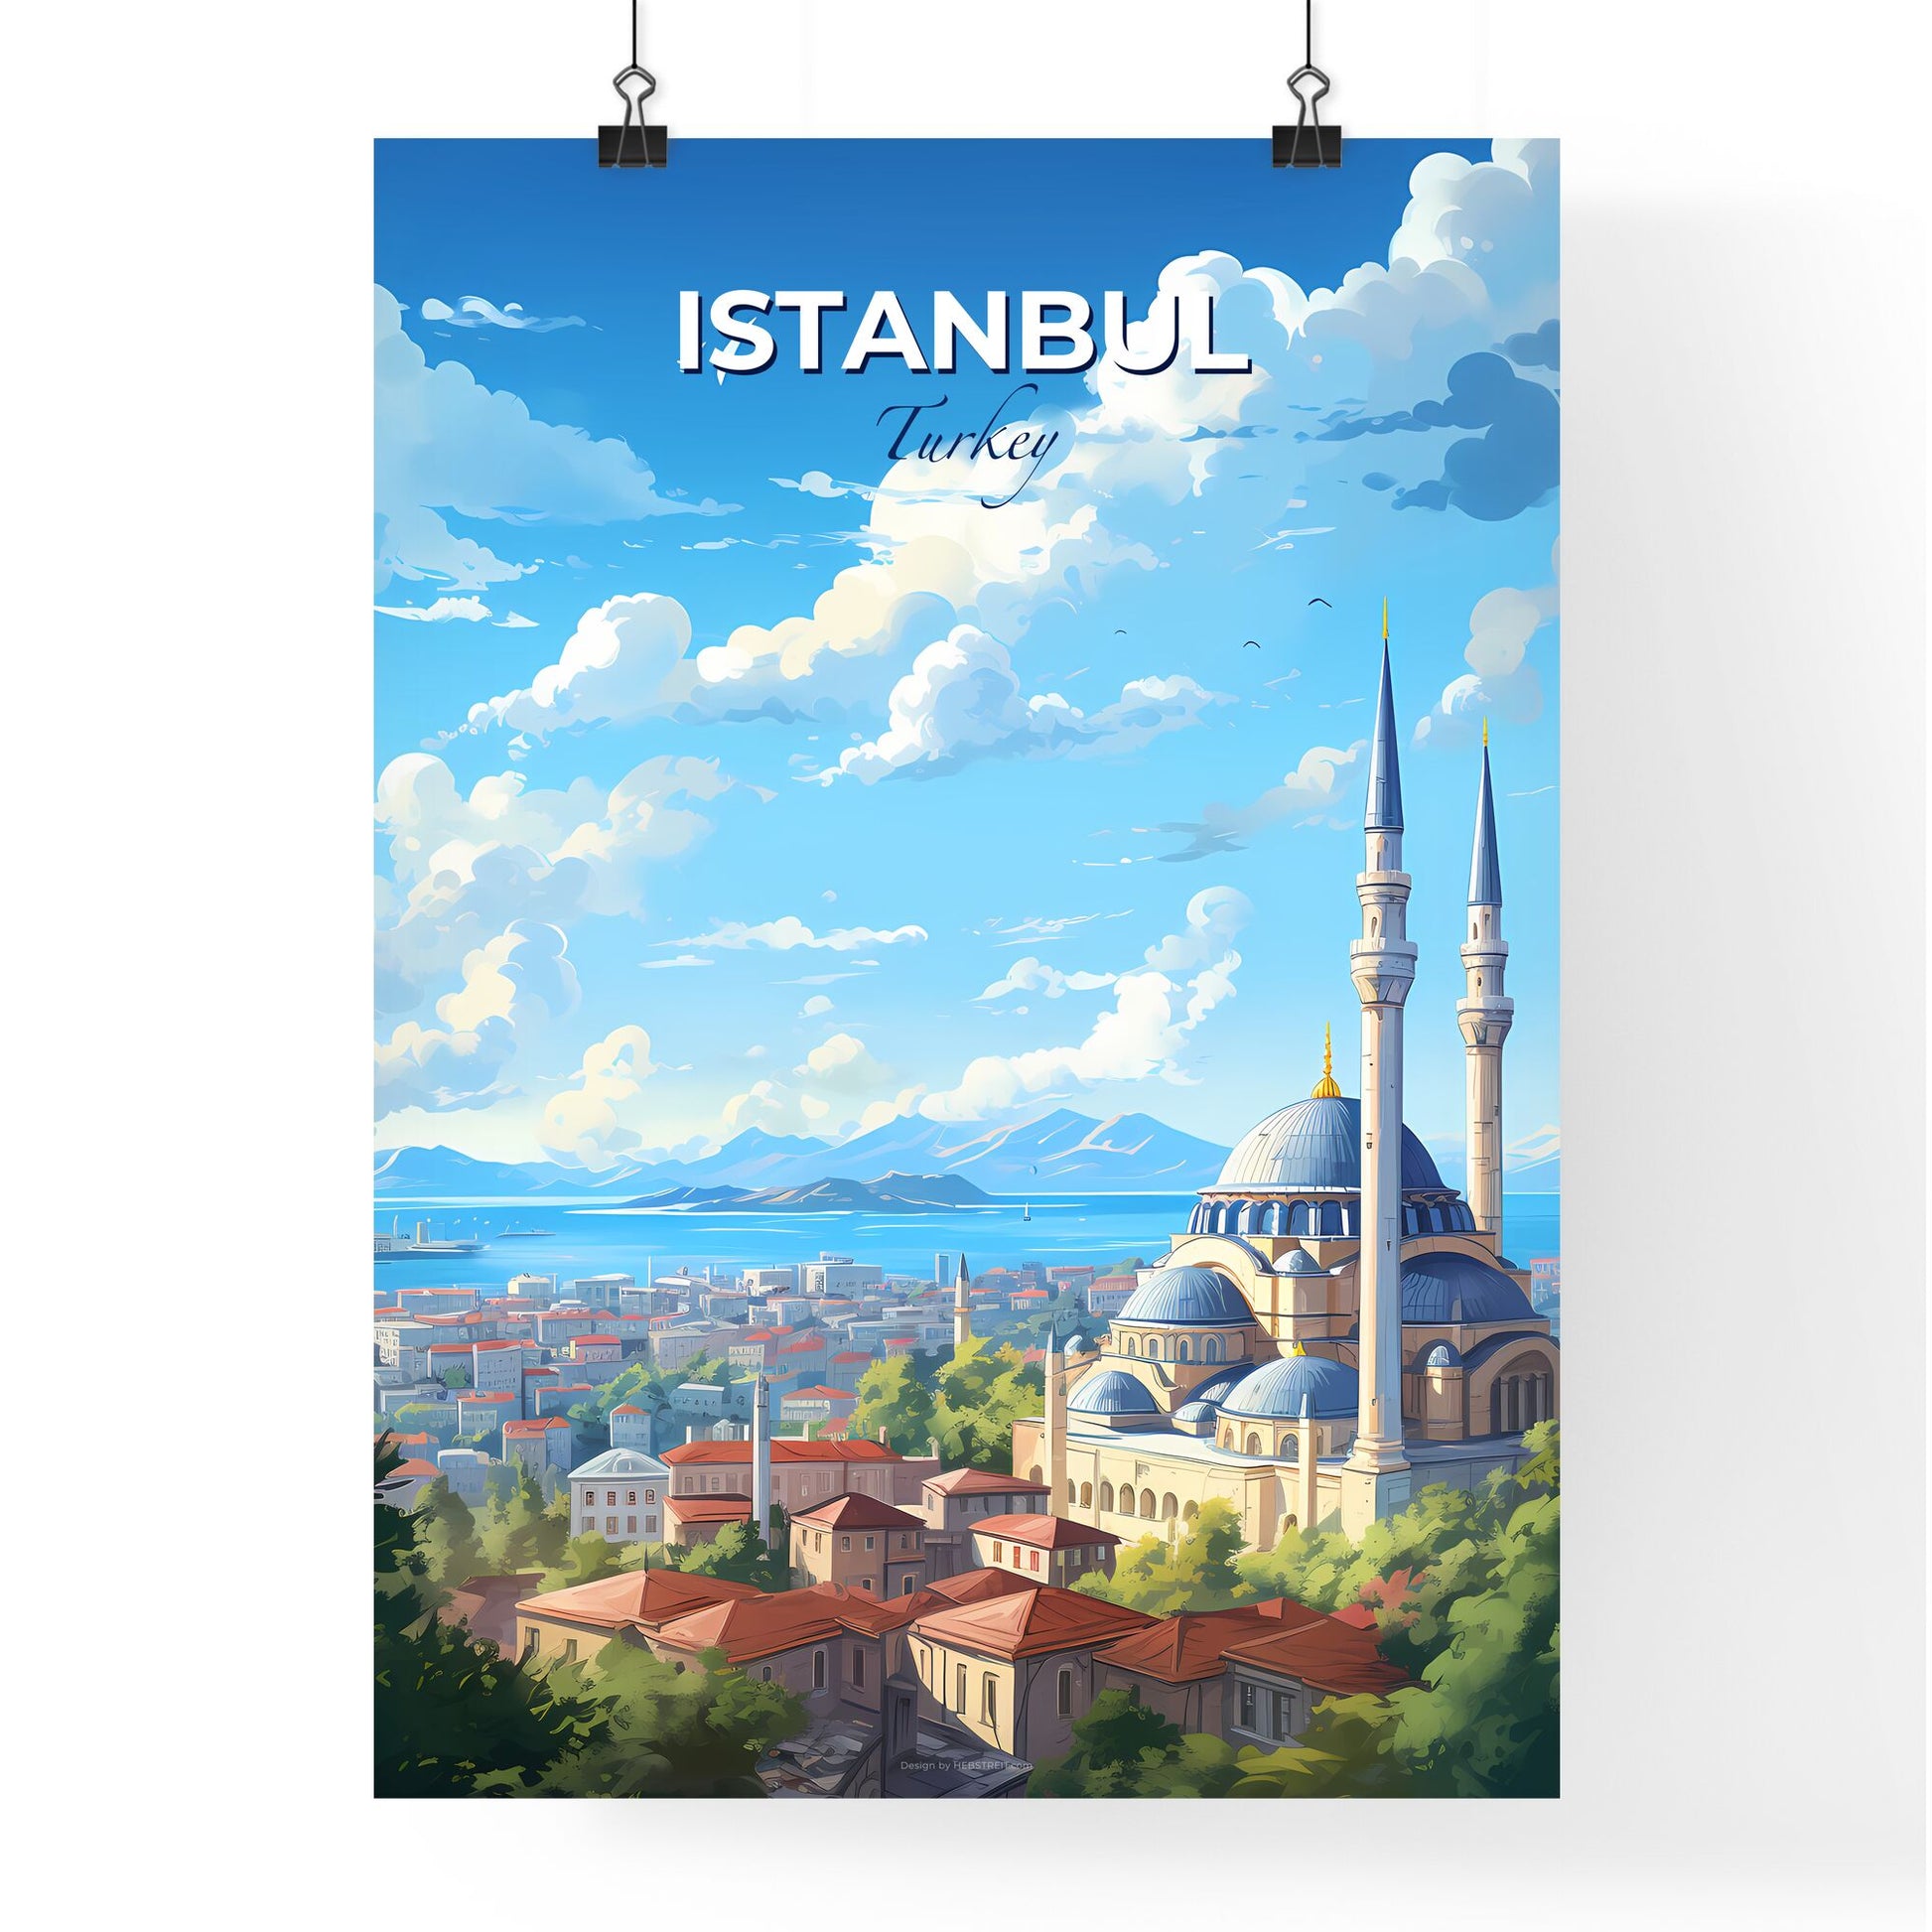 Istanbul Turkey Skyline - A Building With Towers And A City In The Background - Customizable Travel Gift Default Title